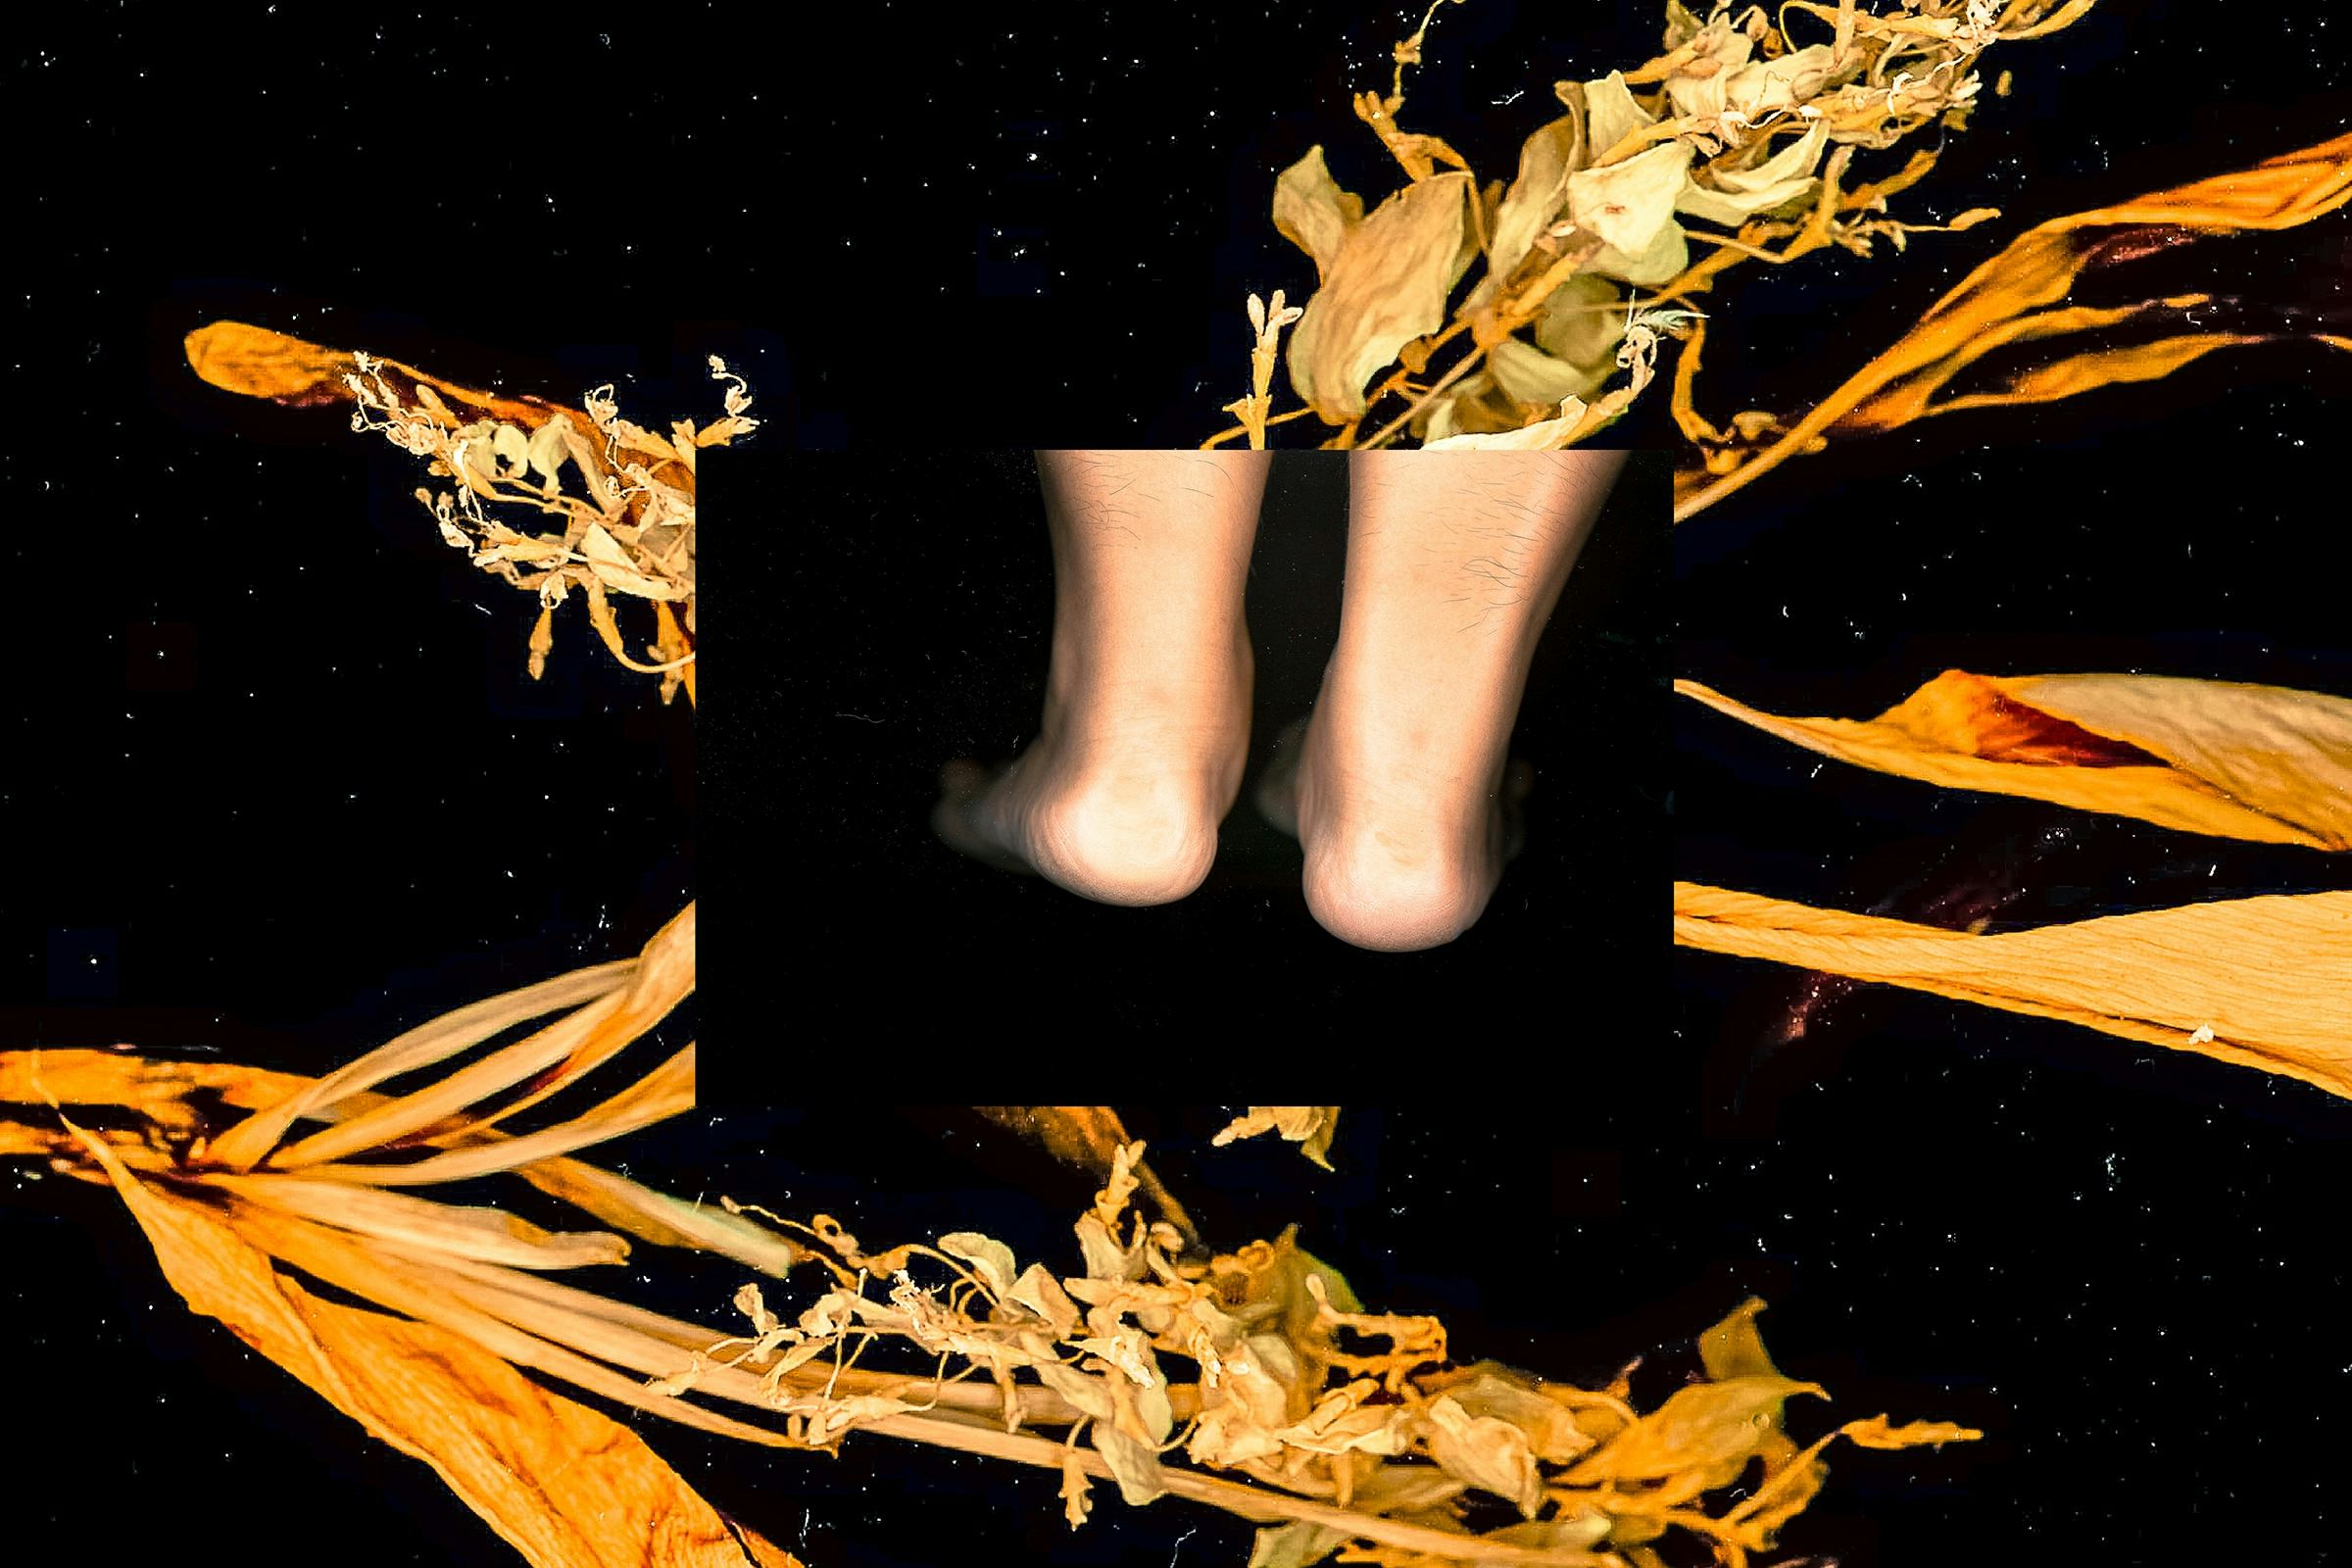 Scan of orange withered flowers, superimposed by a scan of two feet © Shwe Wutt Hmon